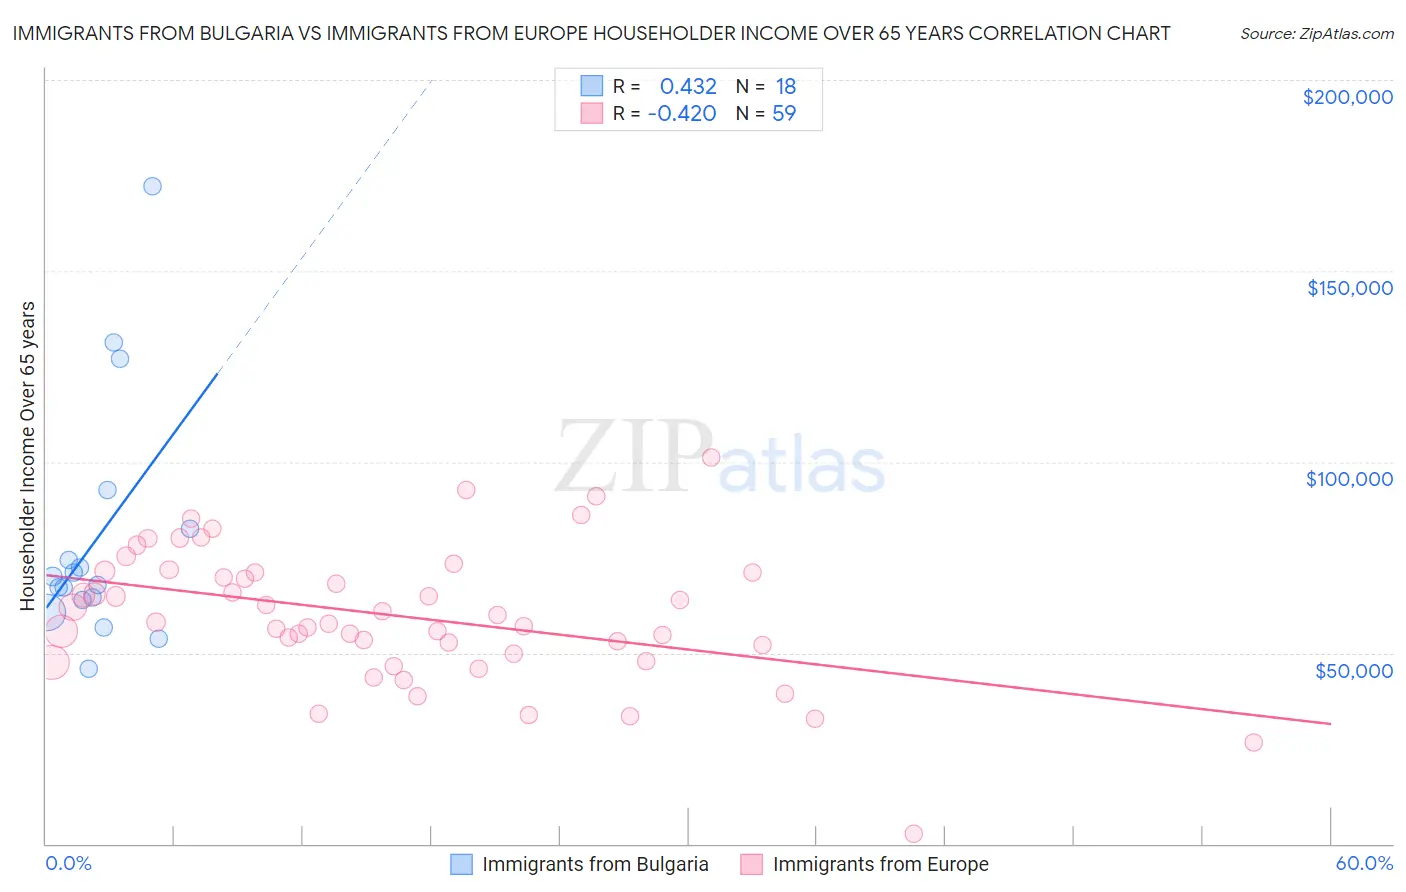 Immigrants from Bulgaria vs Immigrants from Europe Householder Income Over 65 years